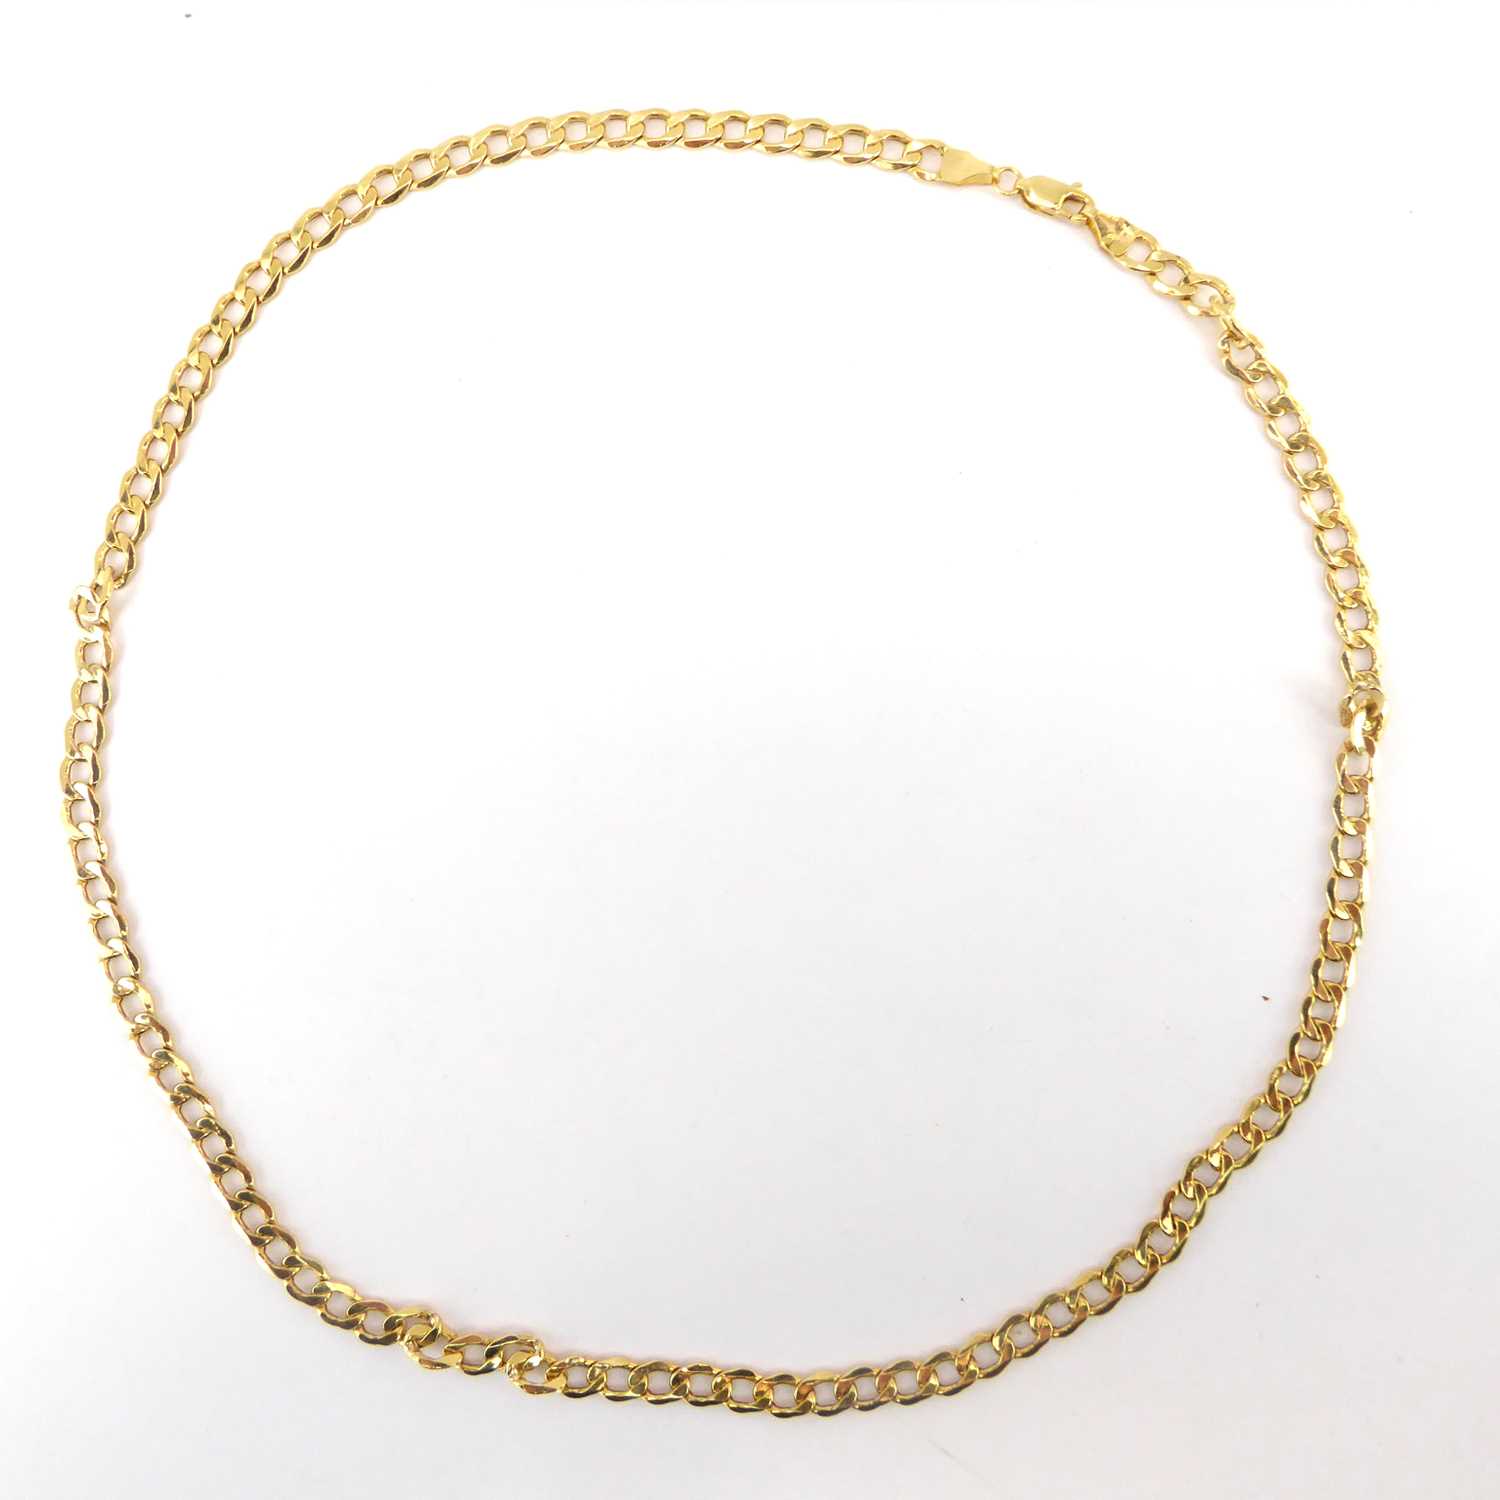 A 9ct gold flat curb necklace united with a lobster claw clasp, approx. 5.3g.Length 50cm